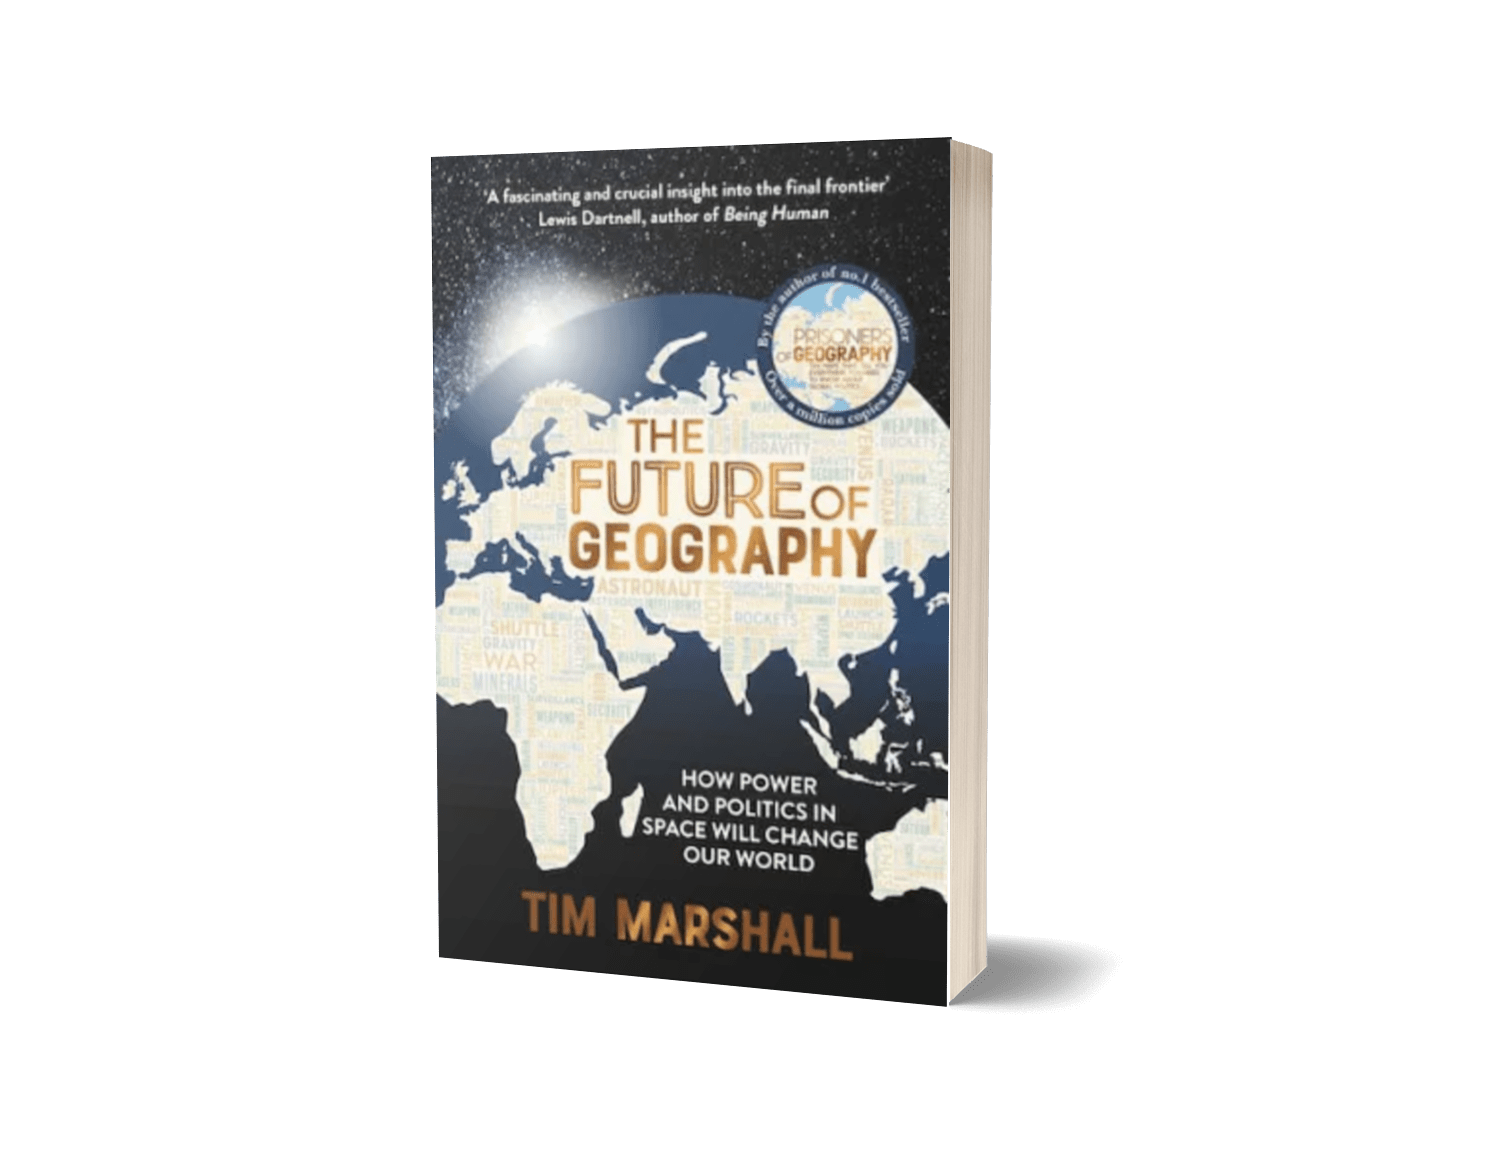 The Future of Geography: How Power and Politics in Space Will Change Our World By Tim Marshall